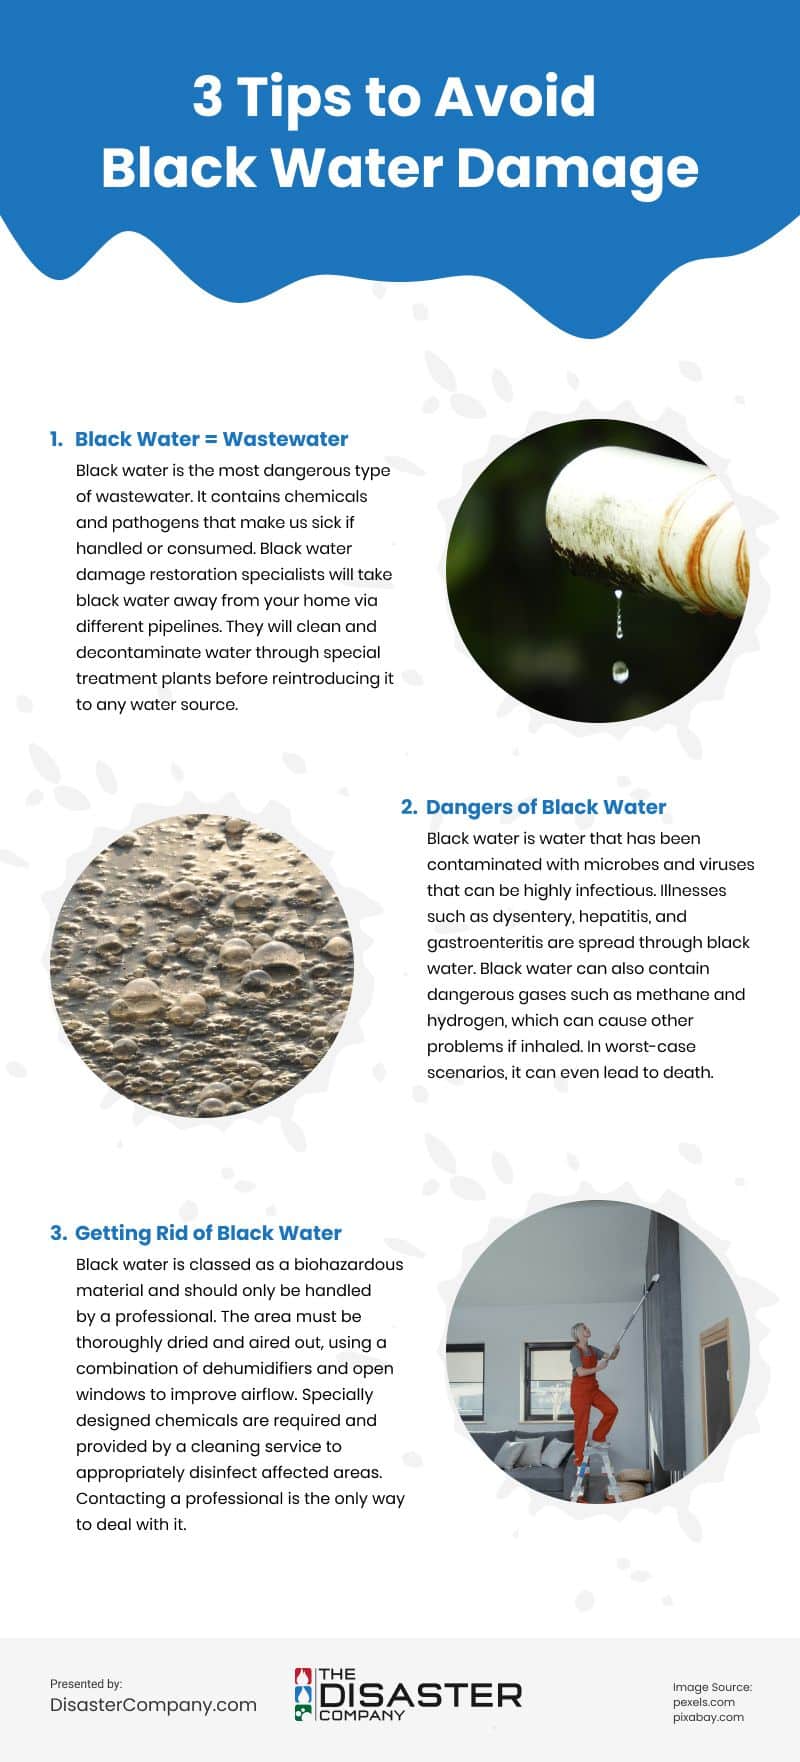 Black Water Damage: What is it and How Do You Deal With it?